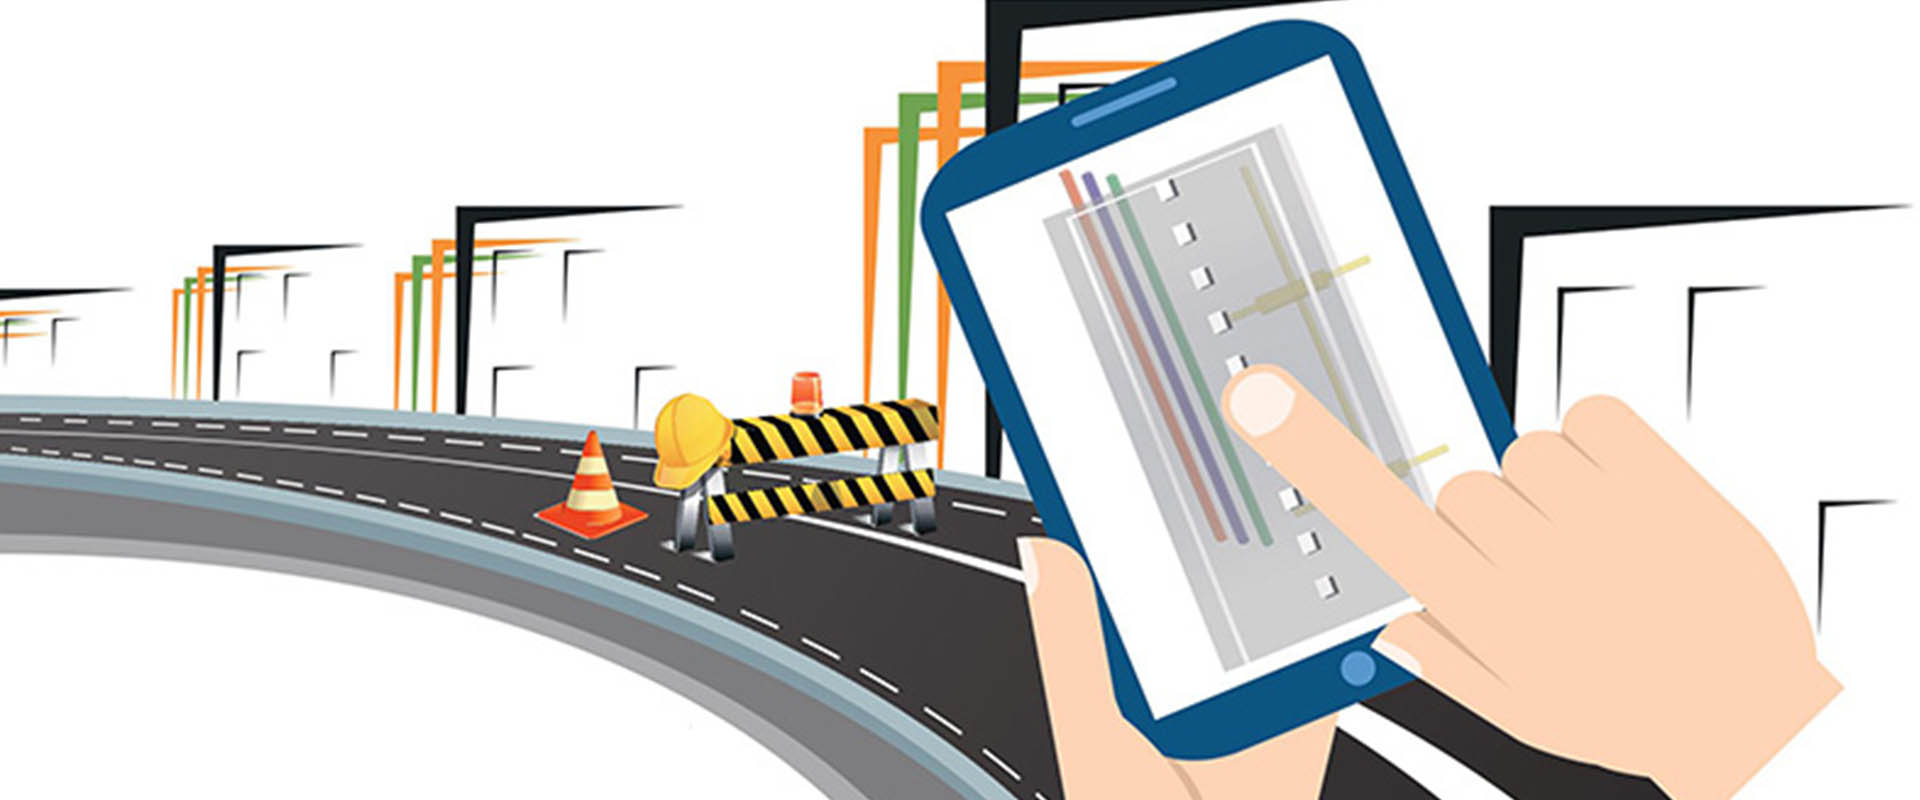 LBS Augmented Reality Assistive System for Utilities Infrastructure Management through Galileo and EGNOS (LARA)